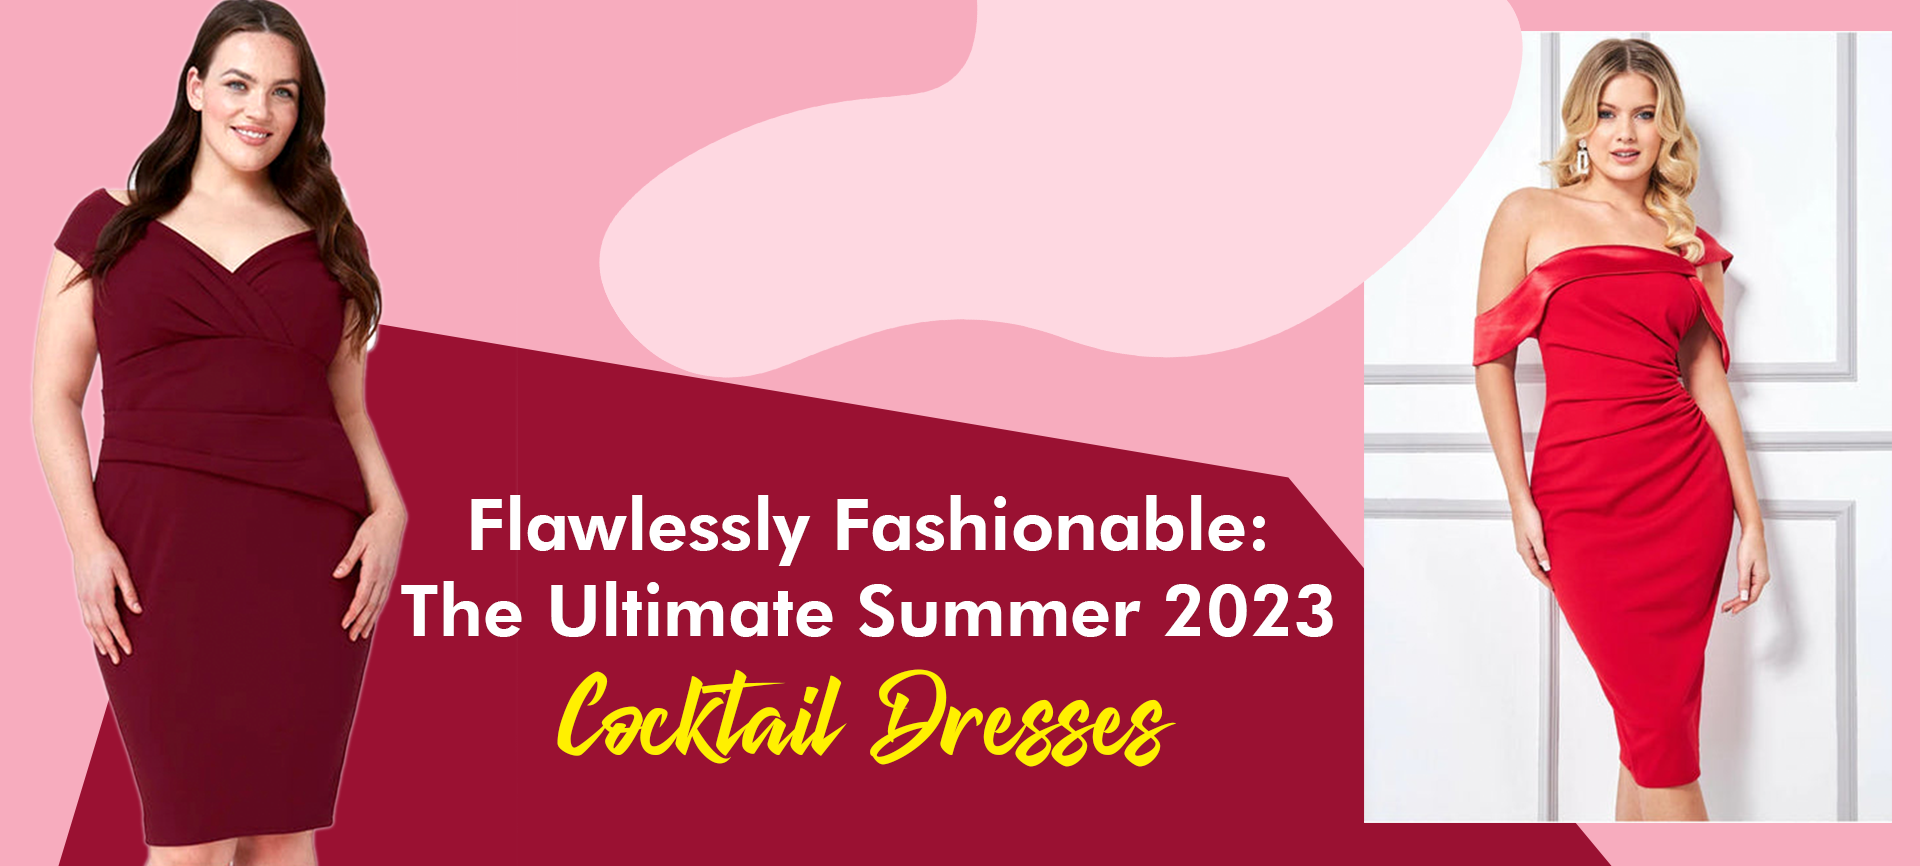 Flawlessly Fashionable: The Ultimate Summer 2023 Cocktail Dresses